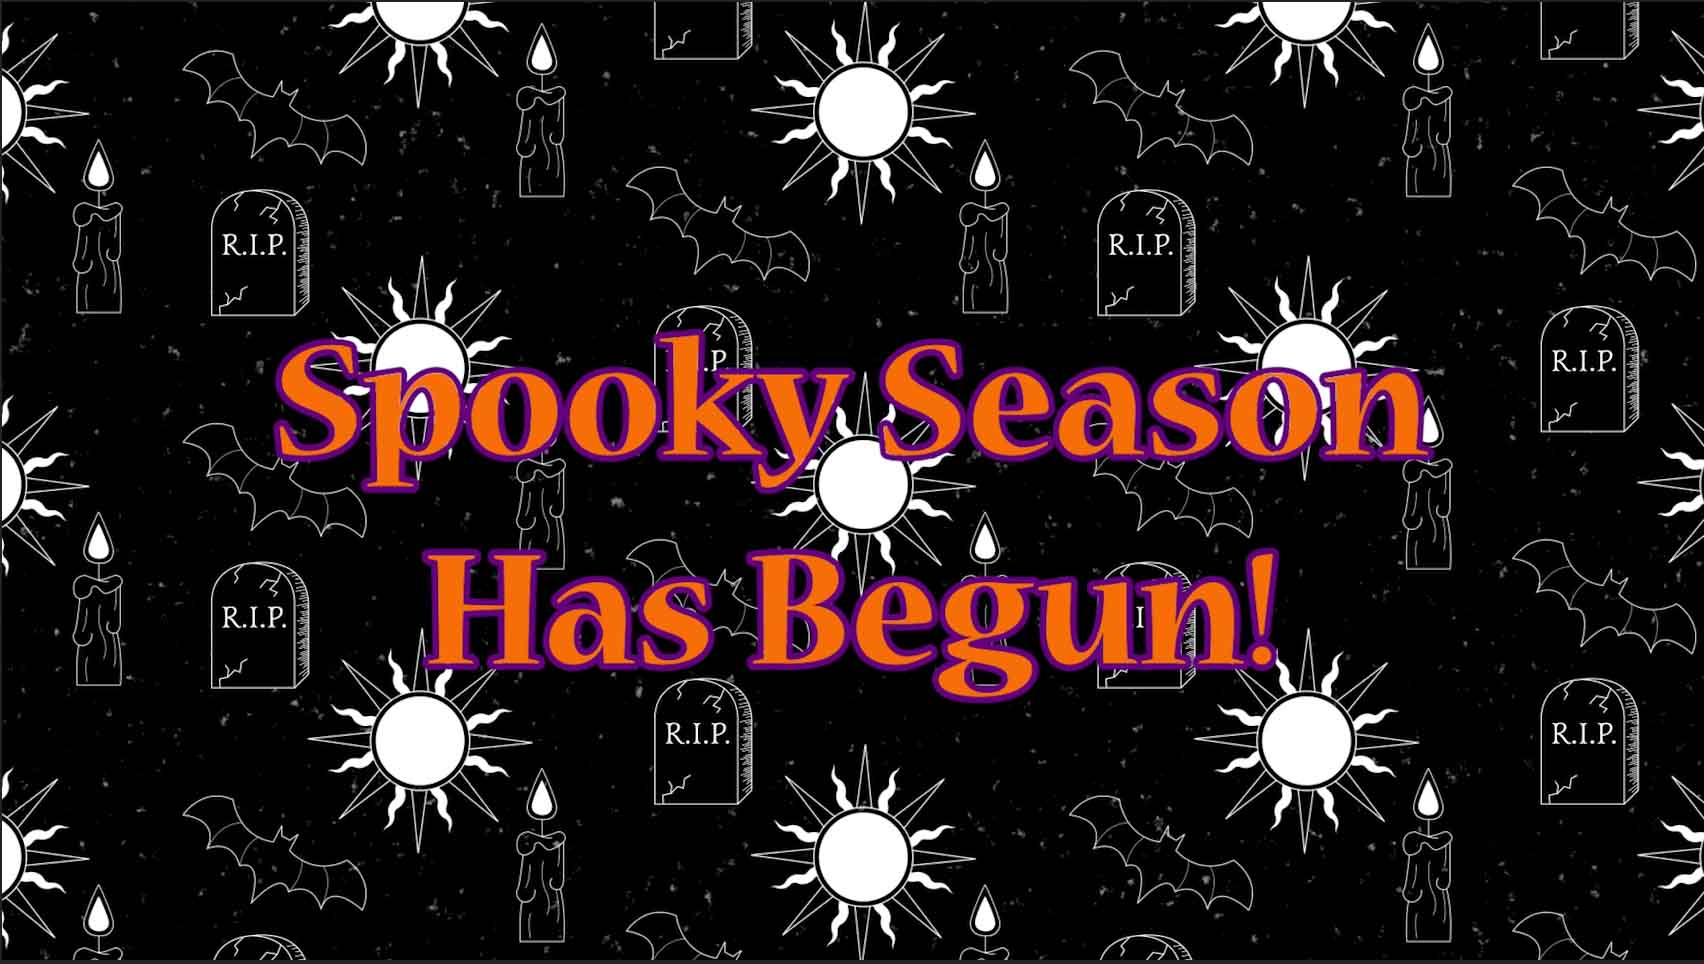 Load video: Featured products for Spooky Season